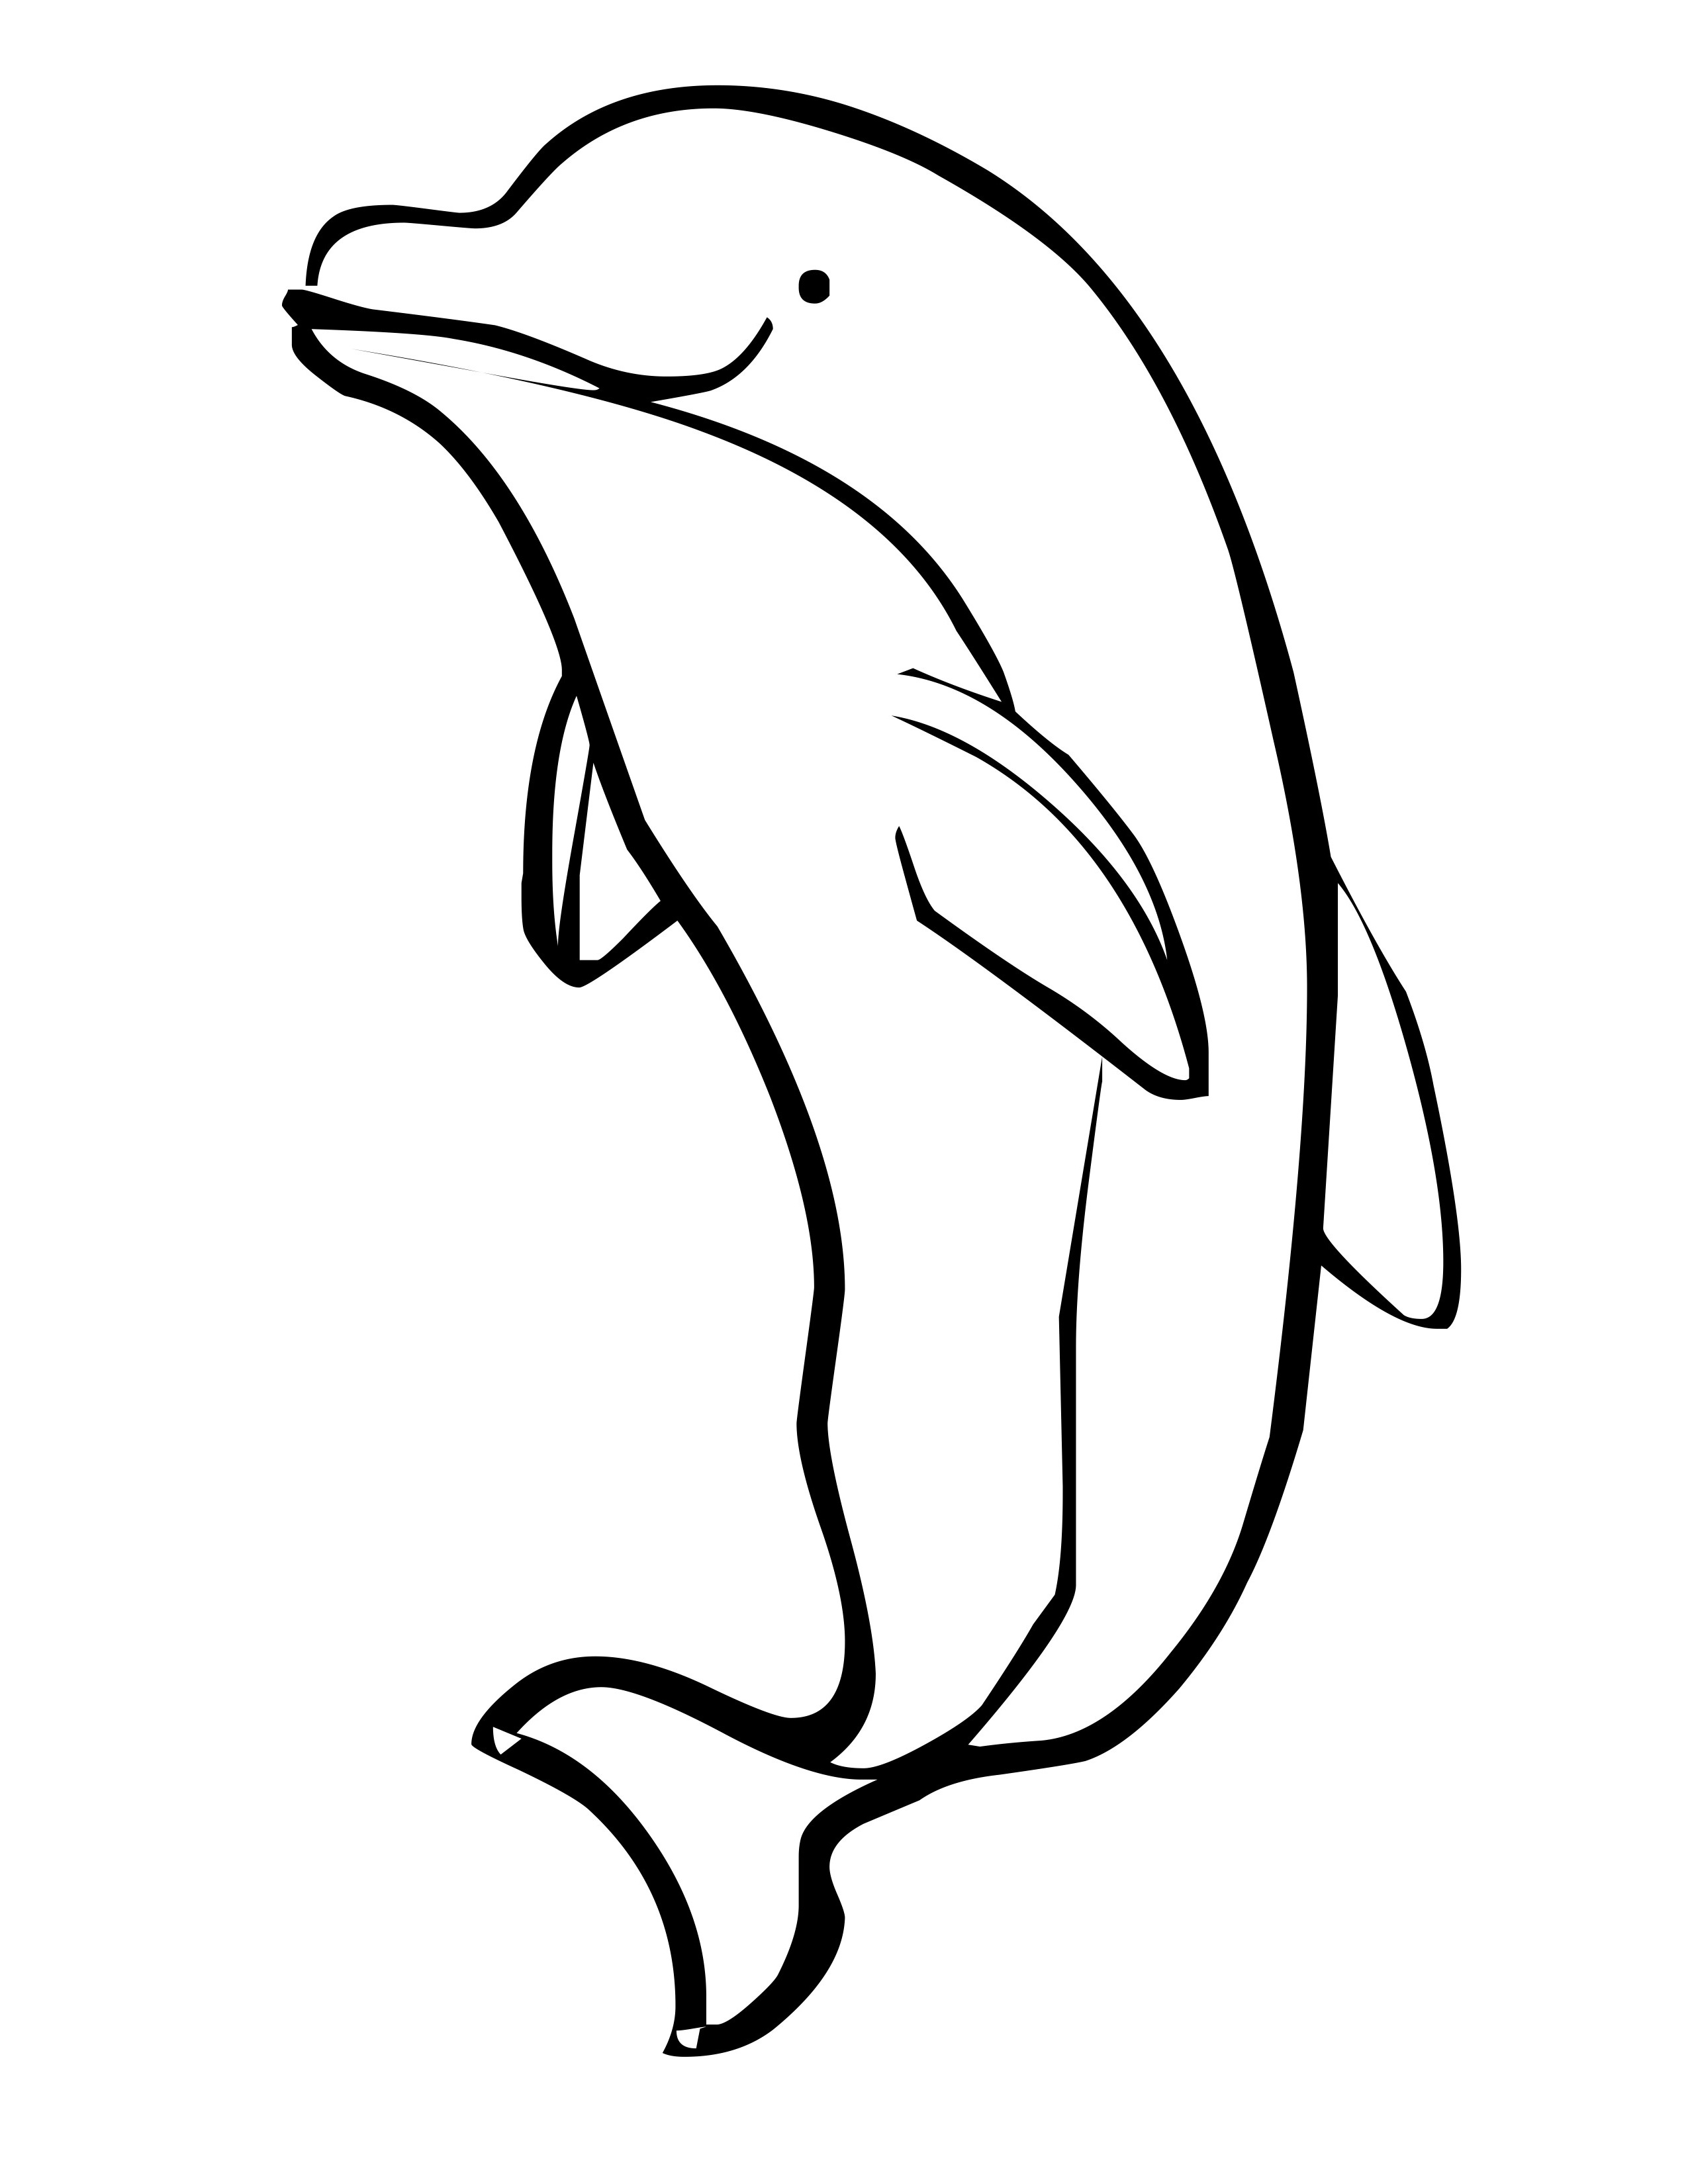 Dolphin Coloring Pages for Kids Educative Printable